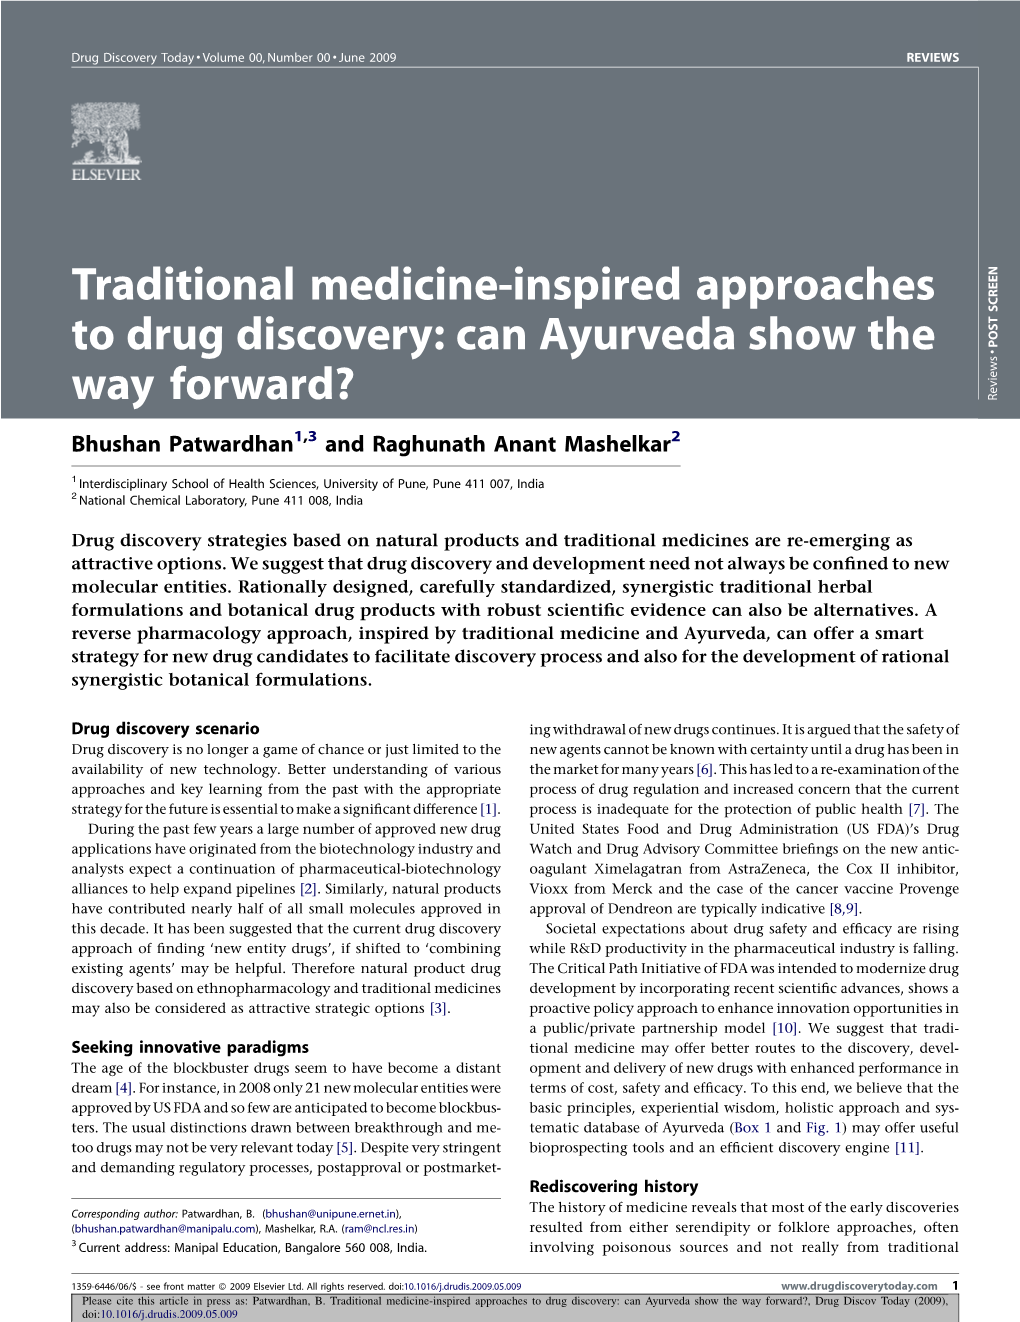 Traditional Medicine-Inspired Approaches to Drug Discovery: Can